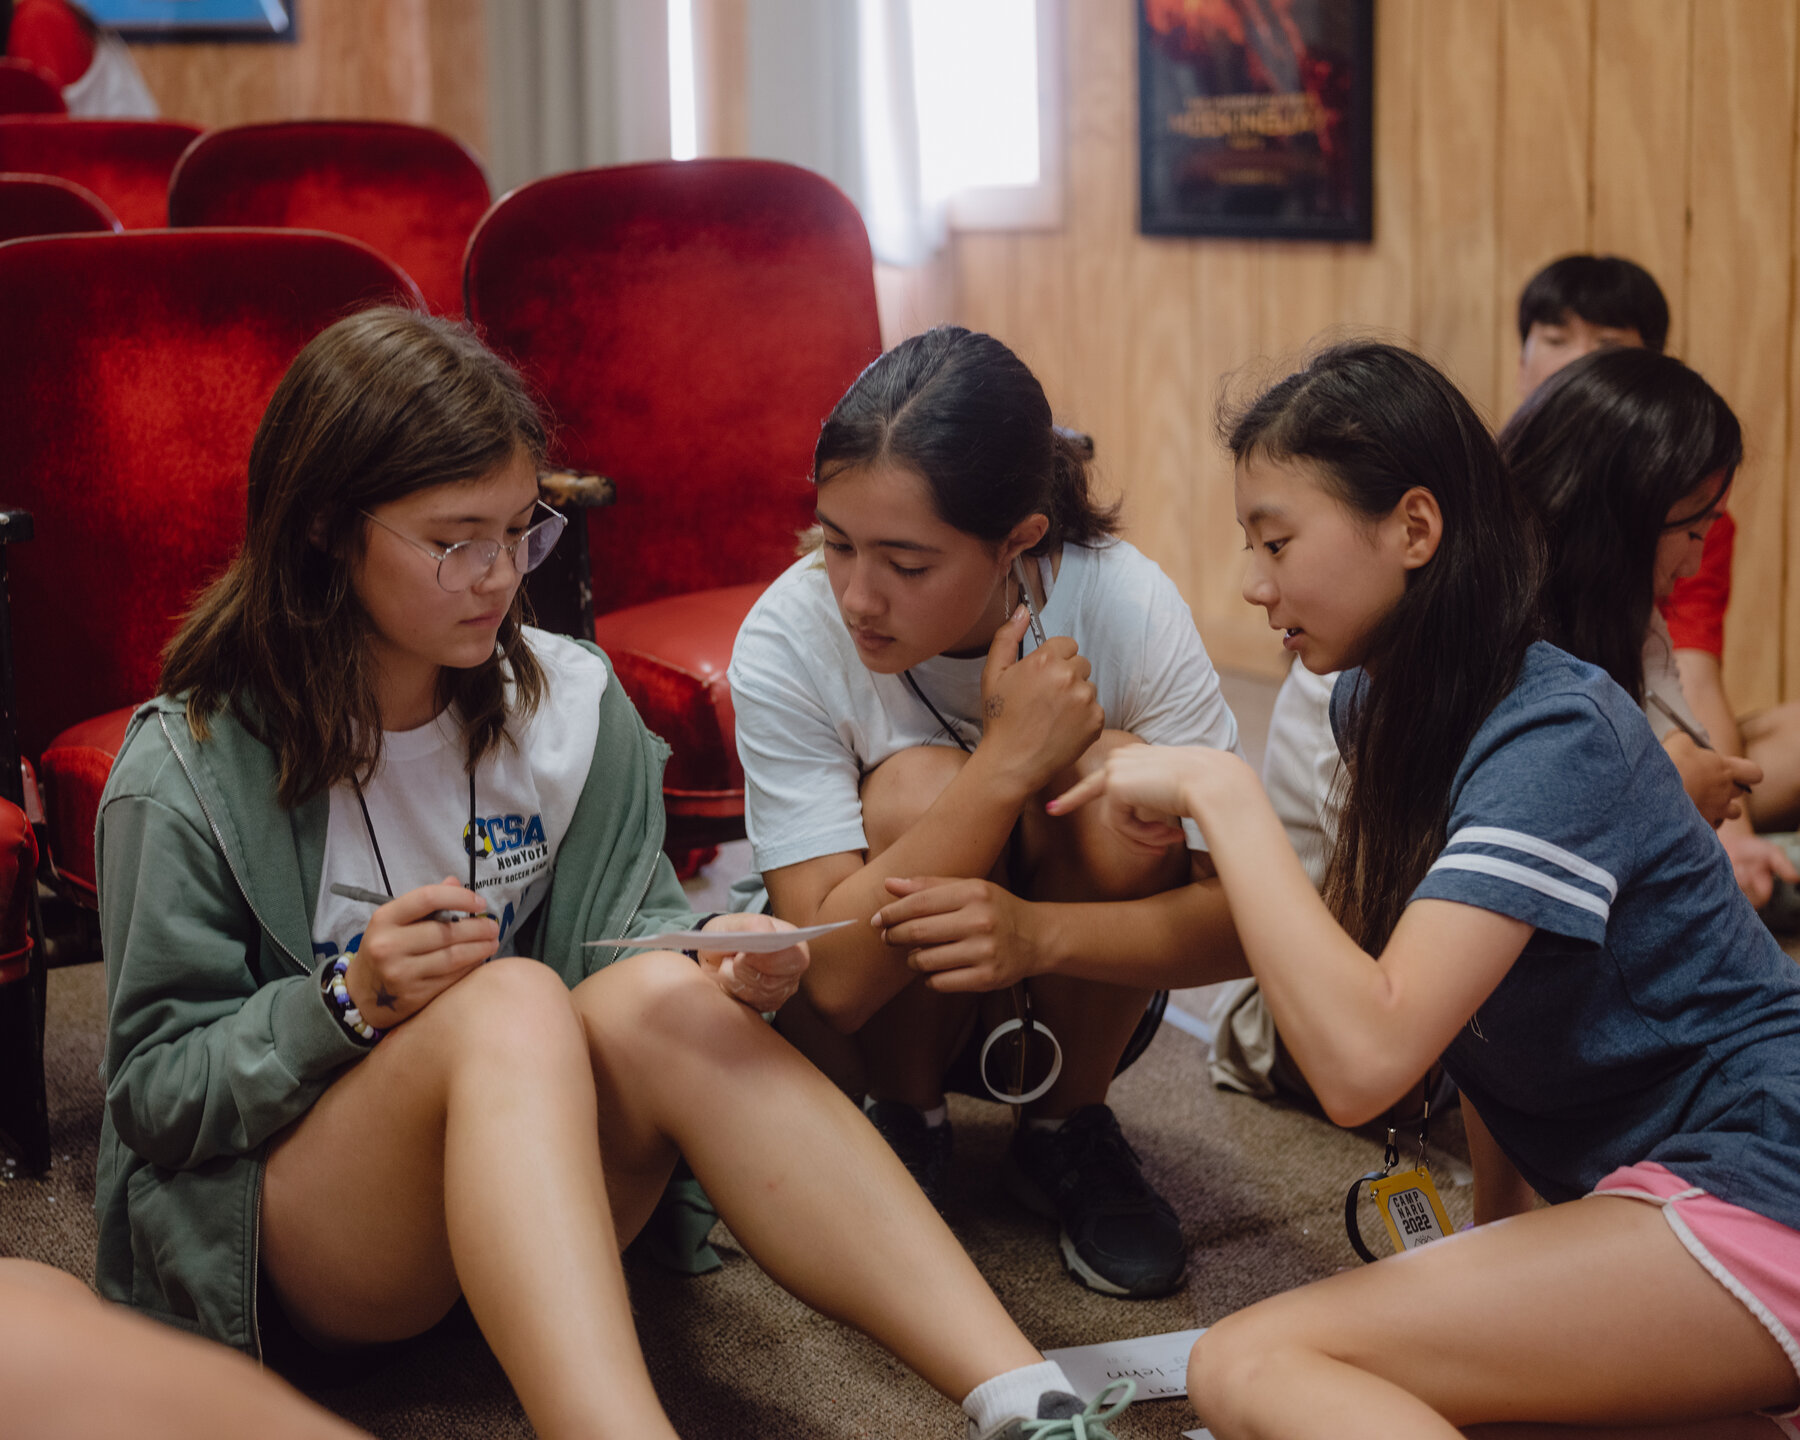 Three girls sitting on the floor of a wood-paneled room, in front of rows of red velvet seats. The girl on the left wears a white T-shirt, a green sweatshirt and glasses and holds a pen and a piece of paper. The girls on the right wear a white T-shirt and a blue T-shirt and pink shorts and gesture toward the piece of paper.